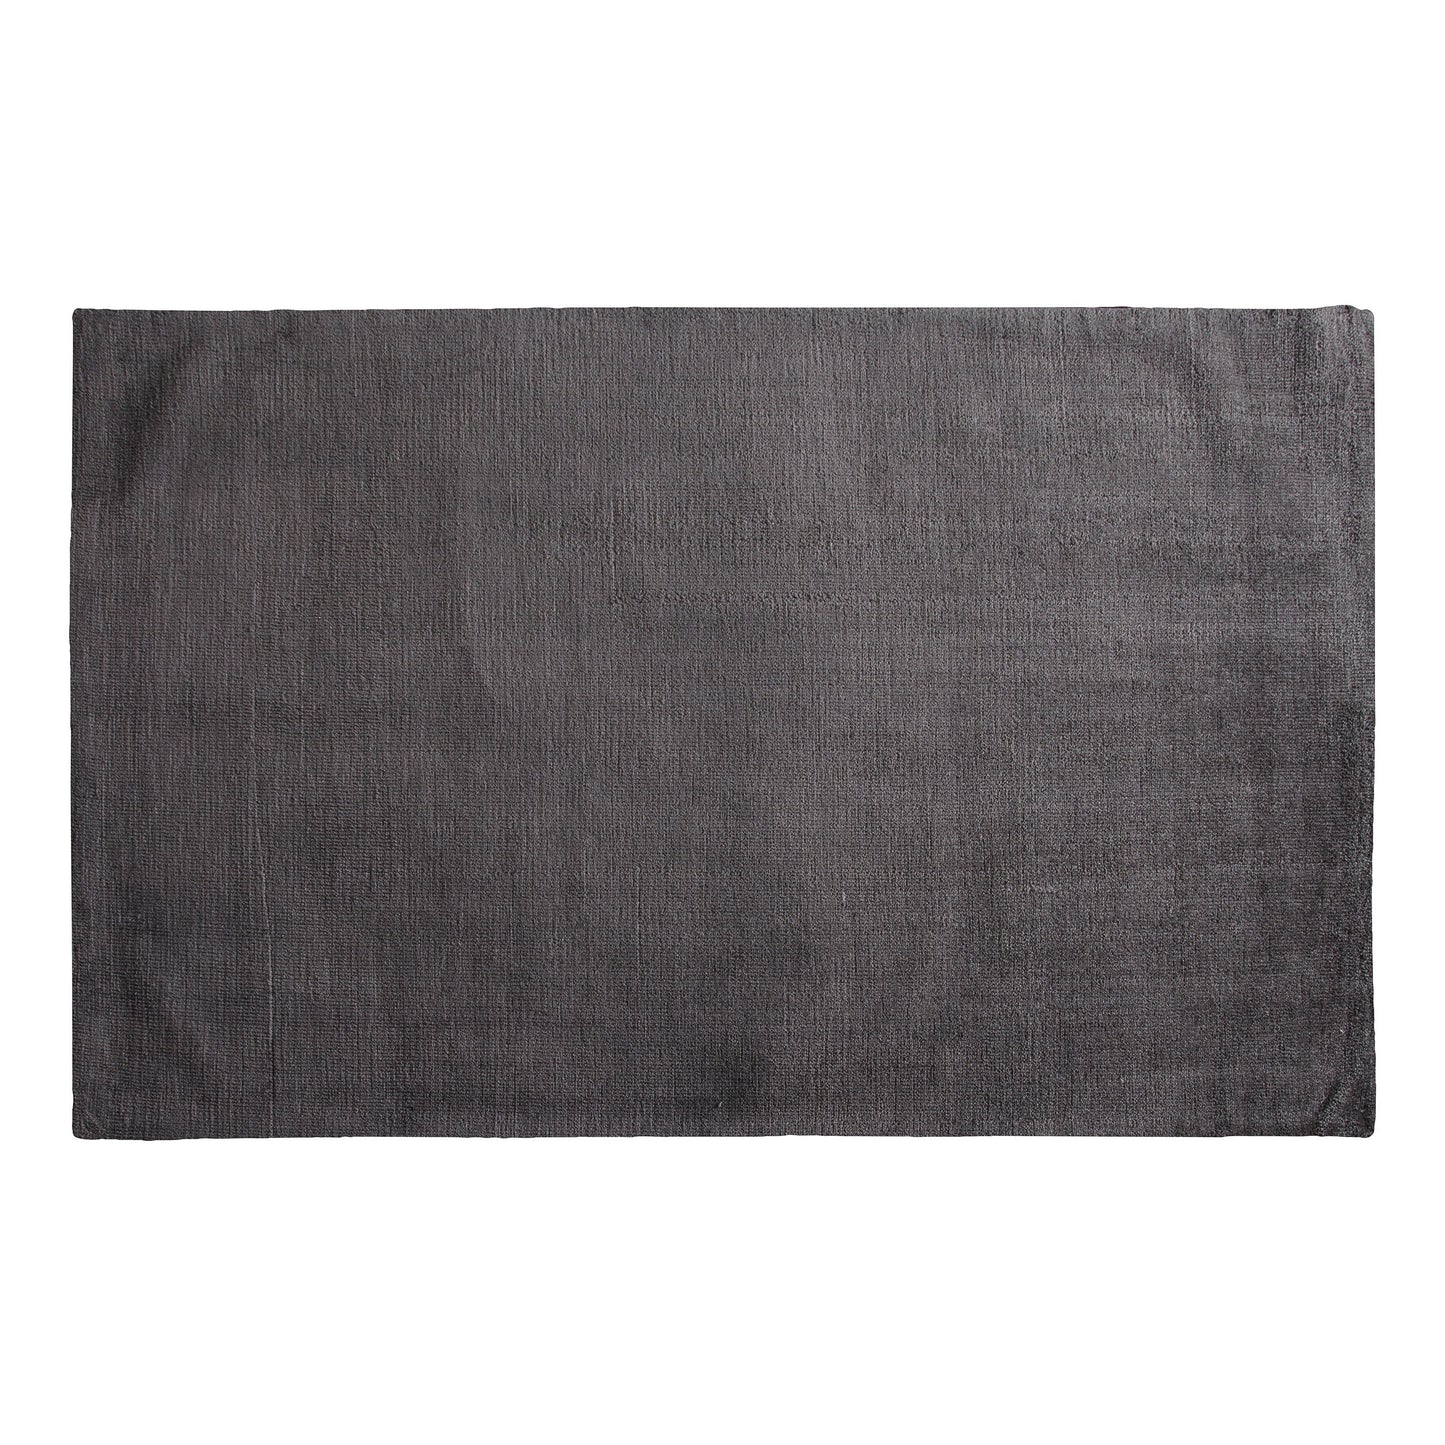 Trivago Rug Charcoal 800x1500mm